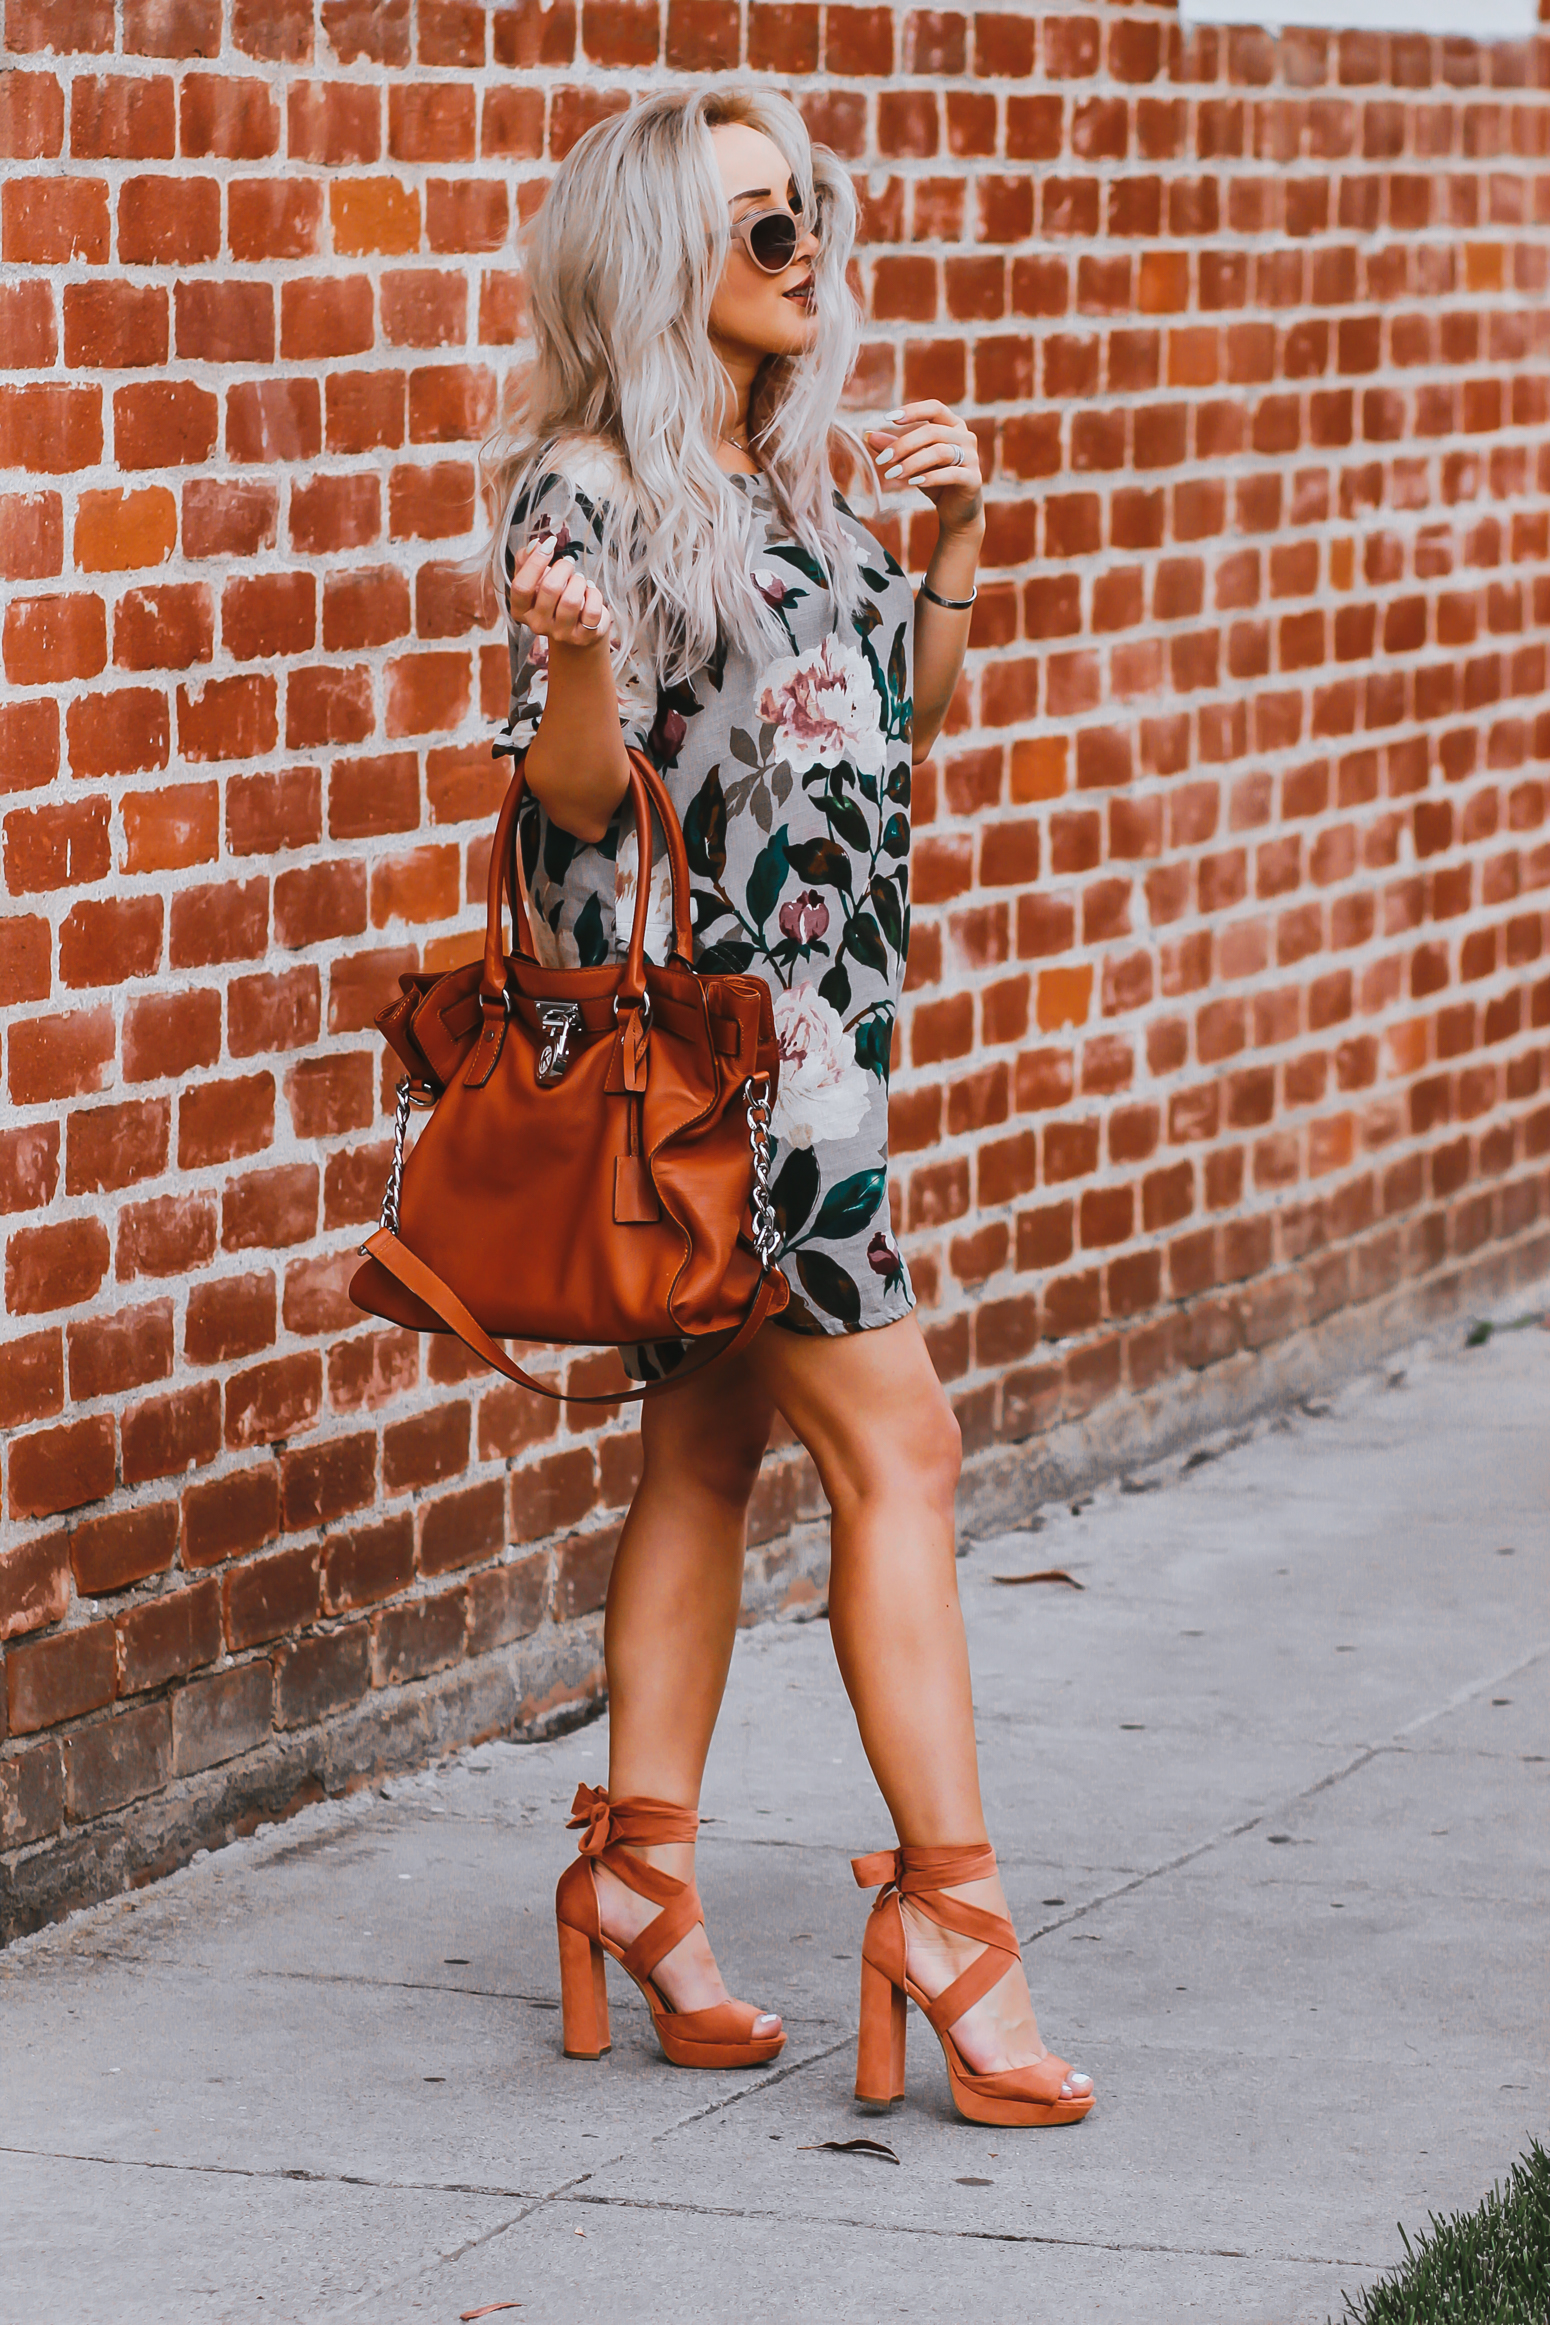 Blondie in the City | Simple Floral Print Dress | Simple Yet Chic 